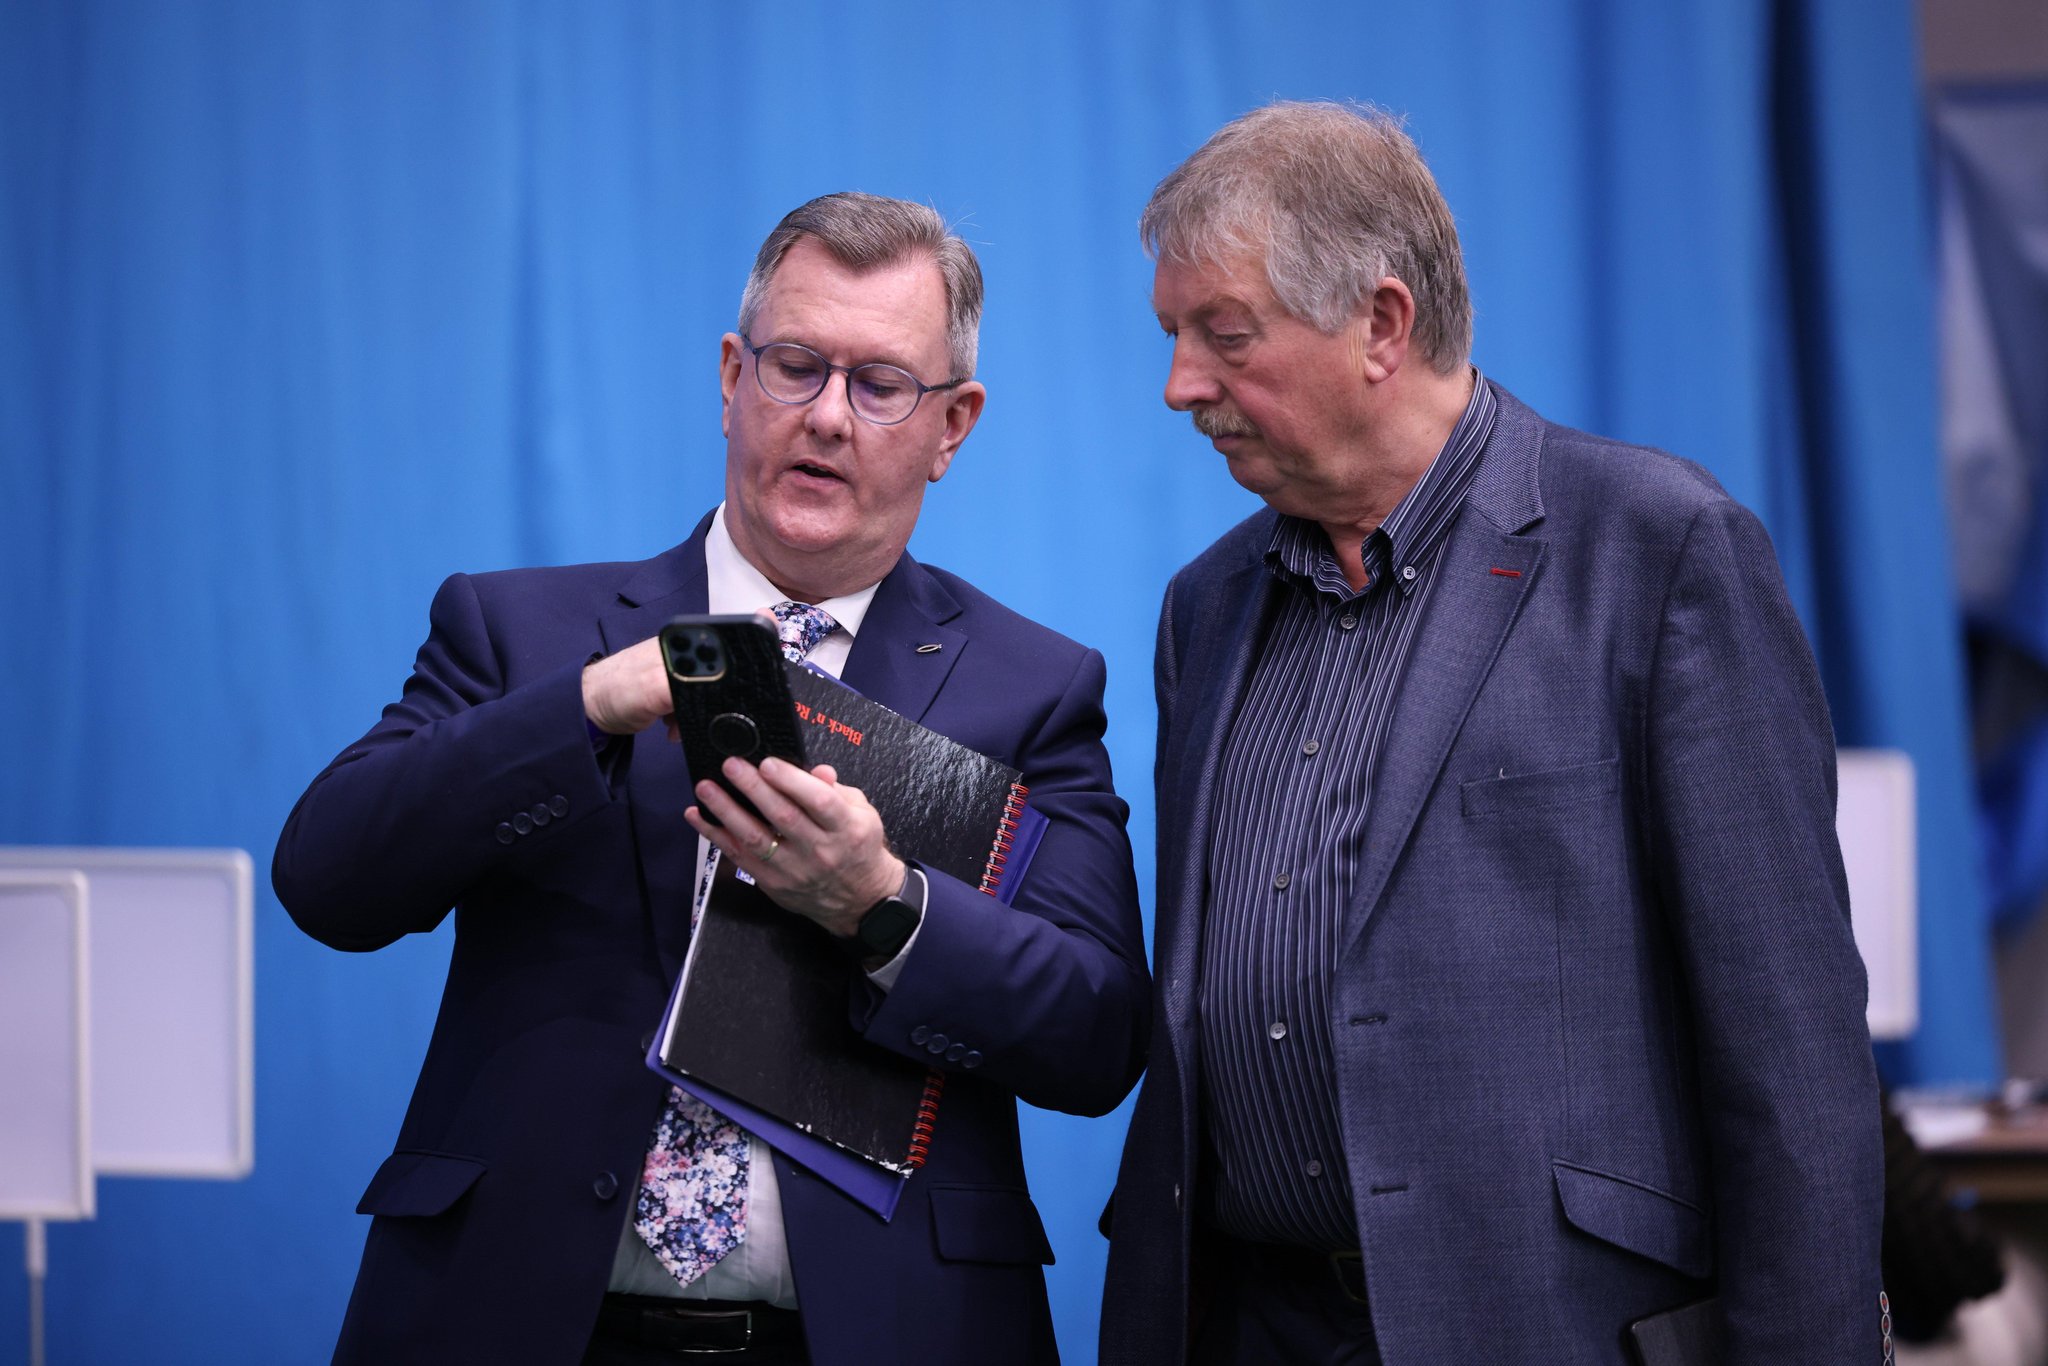 ELECTION 2022: WATCH – Despite our differences unionists must unite against 'destroyers of Northern Ireland' says Sammy Wilson